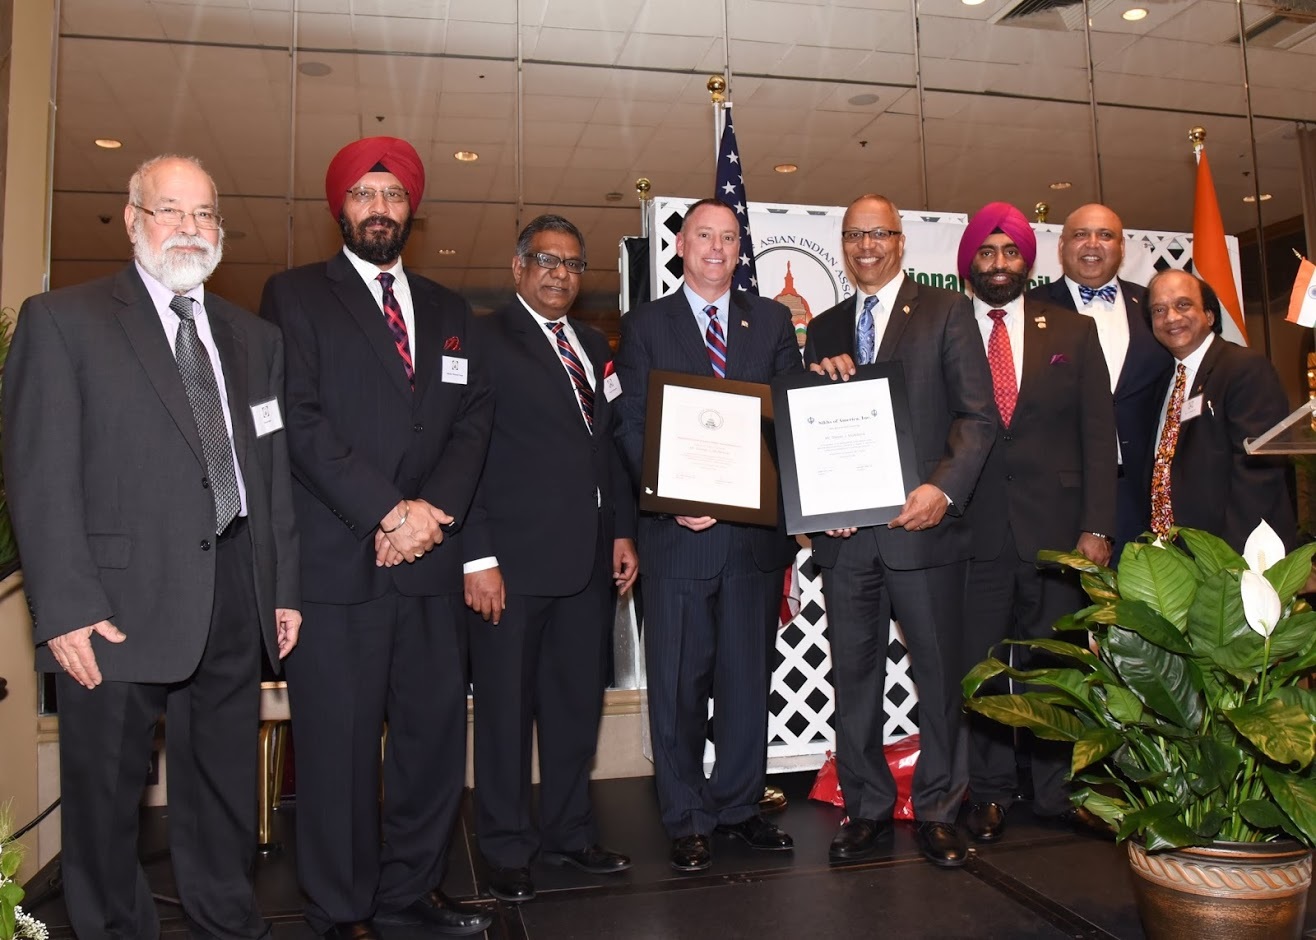 Steve McAdams, Executive Director of Maryland Governor's Office of Community Initiatives (fourth from left), being recognized for distinguished public service and outstanding contributions to the community. 